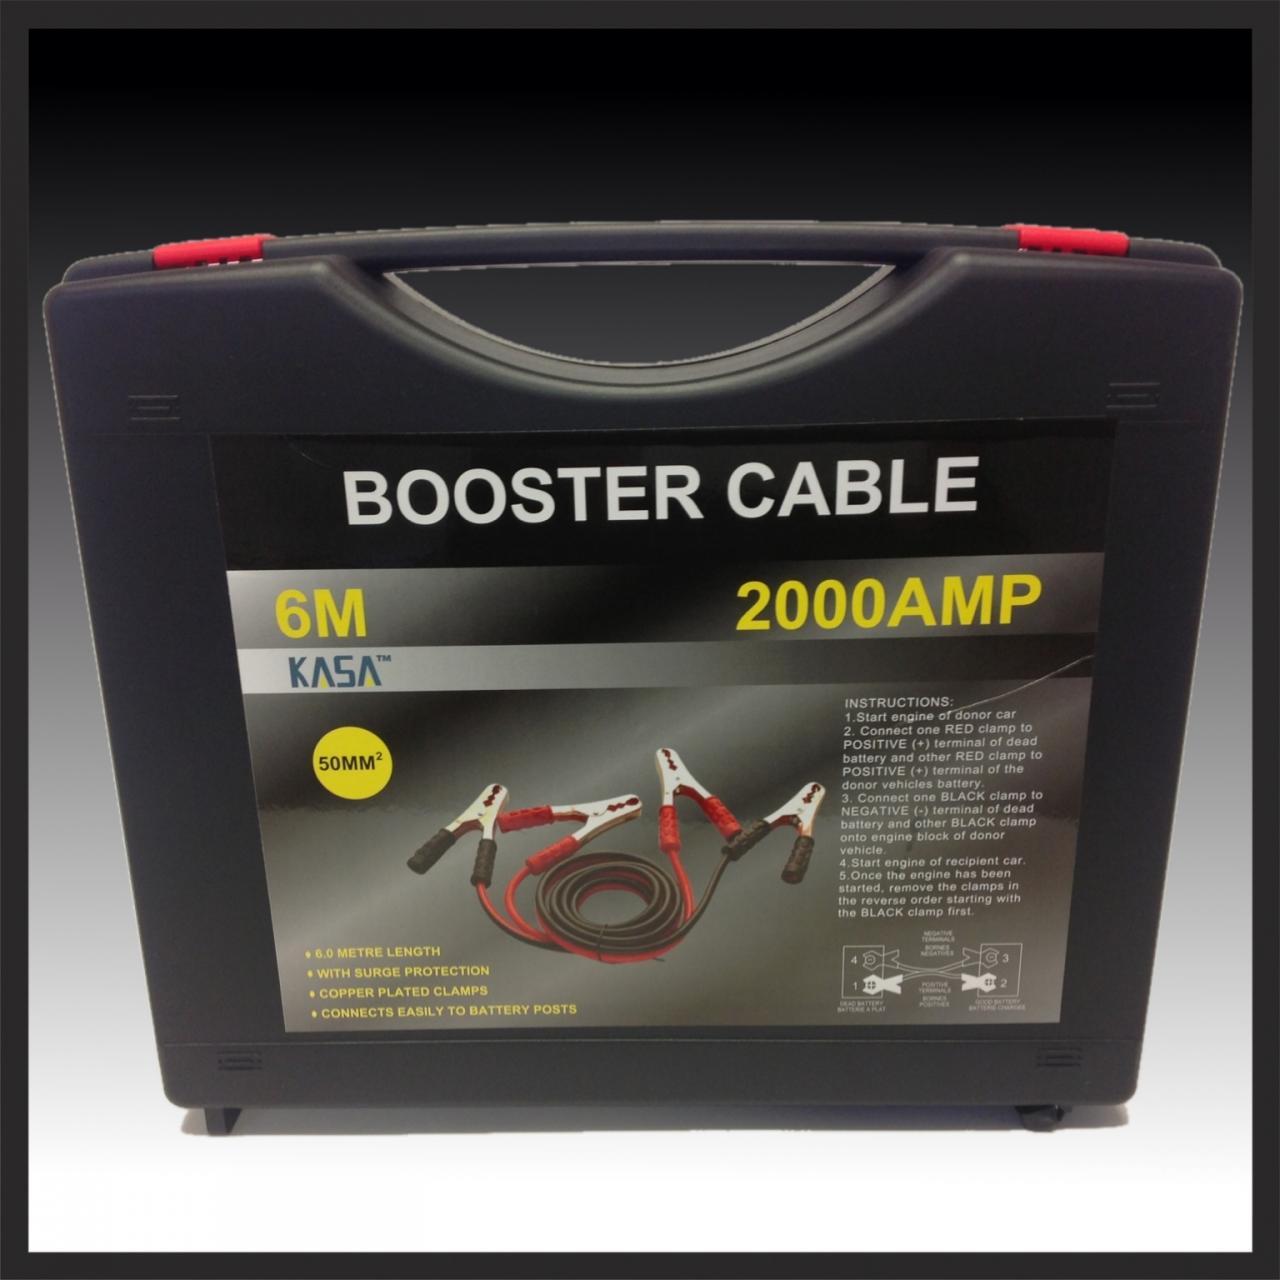 HEAVY DUTY Jumper Leads 2000 AMP 6m Long BOOSTER Cables with SURGE PROTECTION